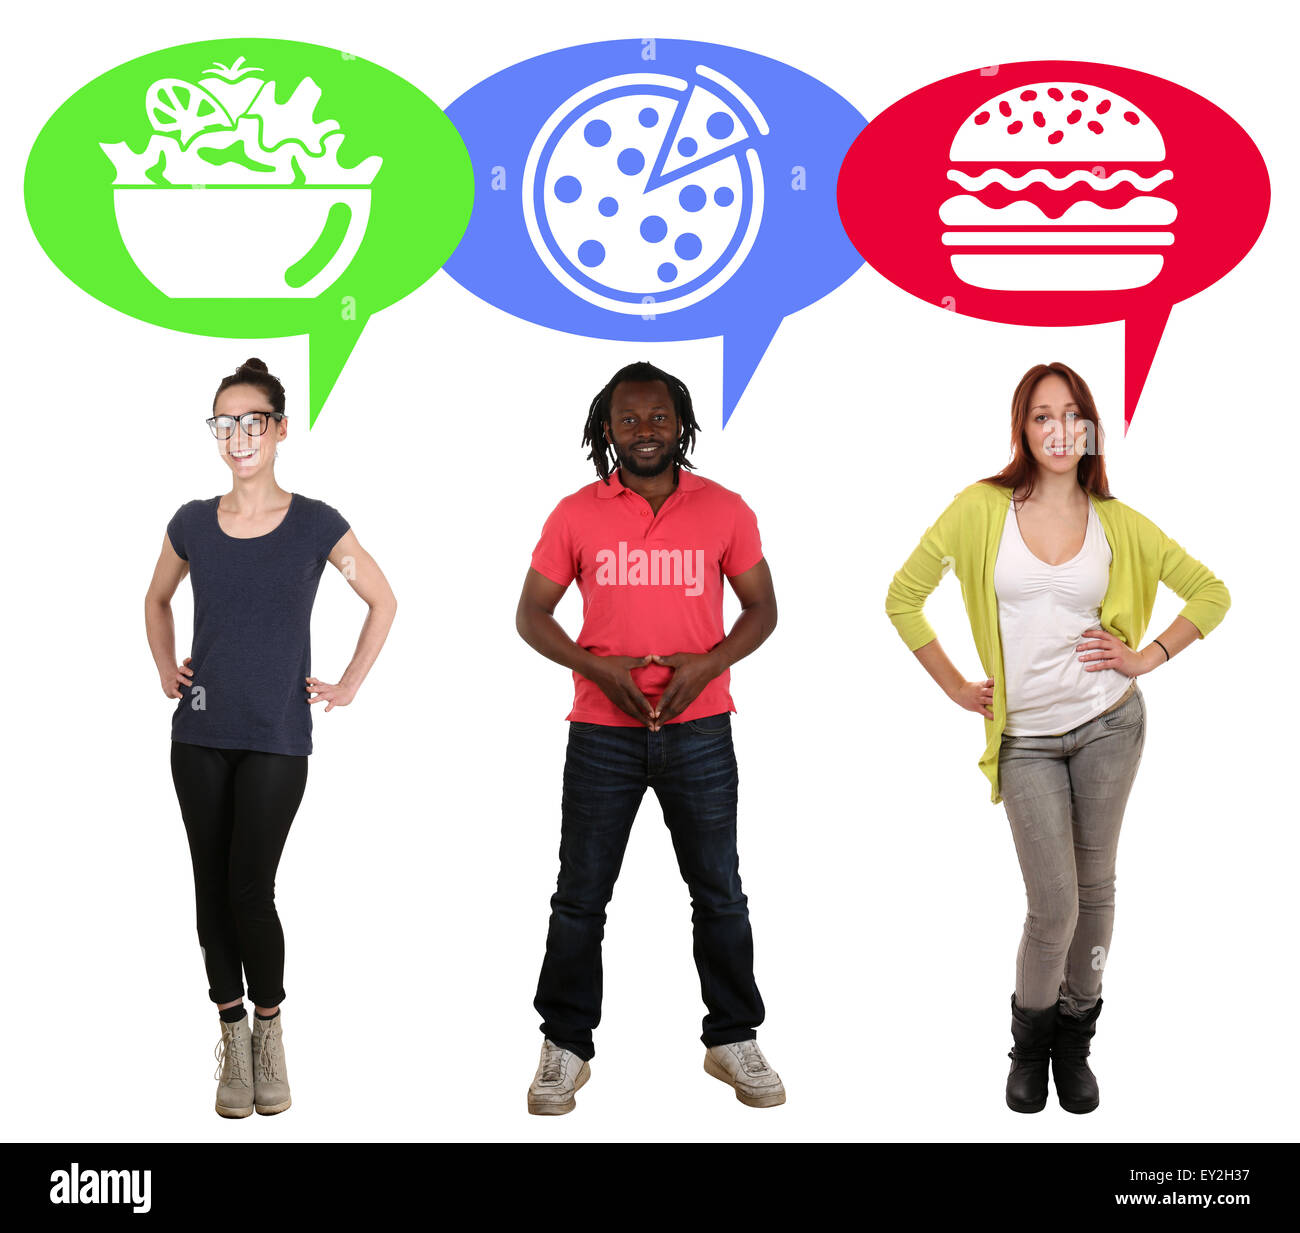 Group of young people choosing food pizza, salad or hamburger fast food healthy eating Stock Photo